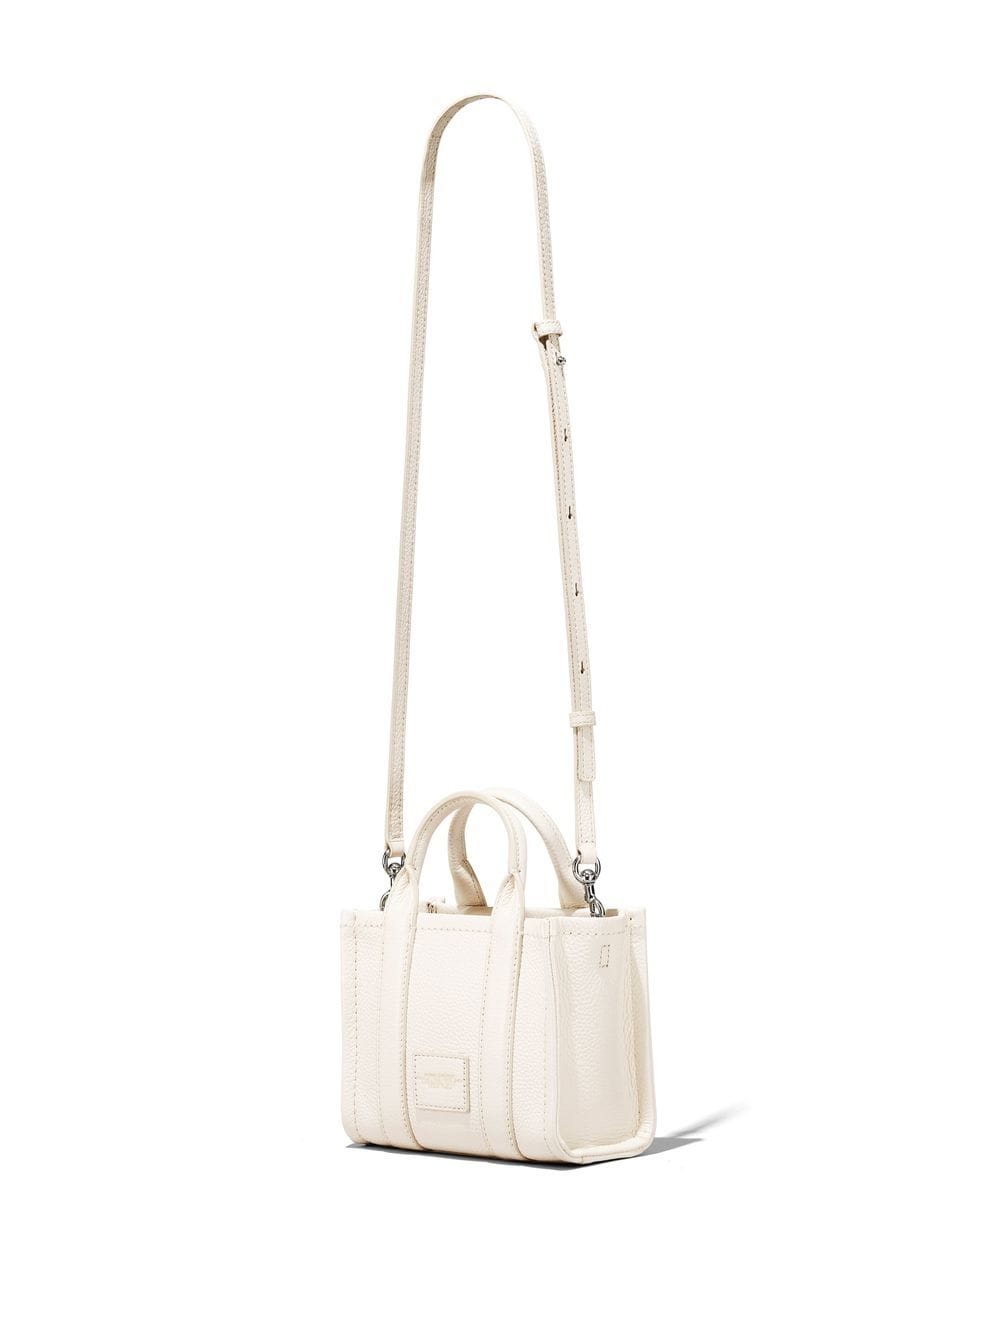 Marc Jacobs Mini The Leather Tote Bag - Farfetch